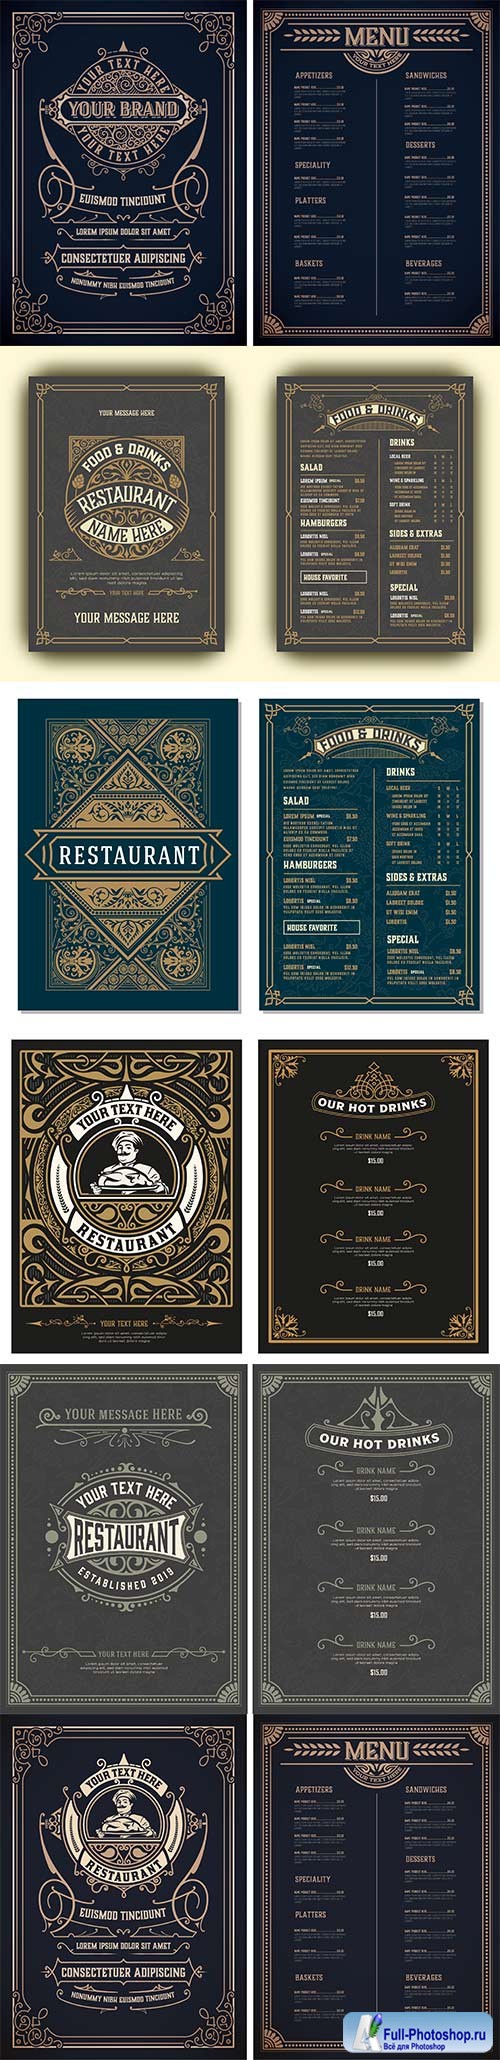 Vintage template for restaurant menu design with Chef 